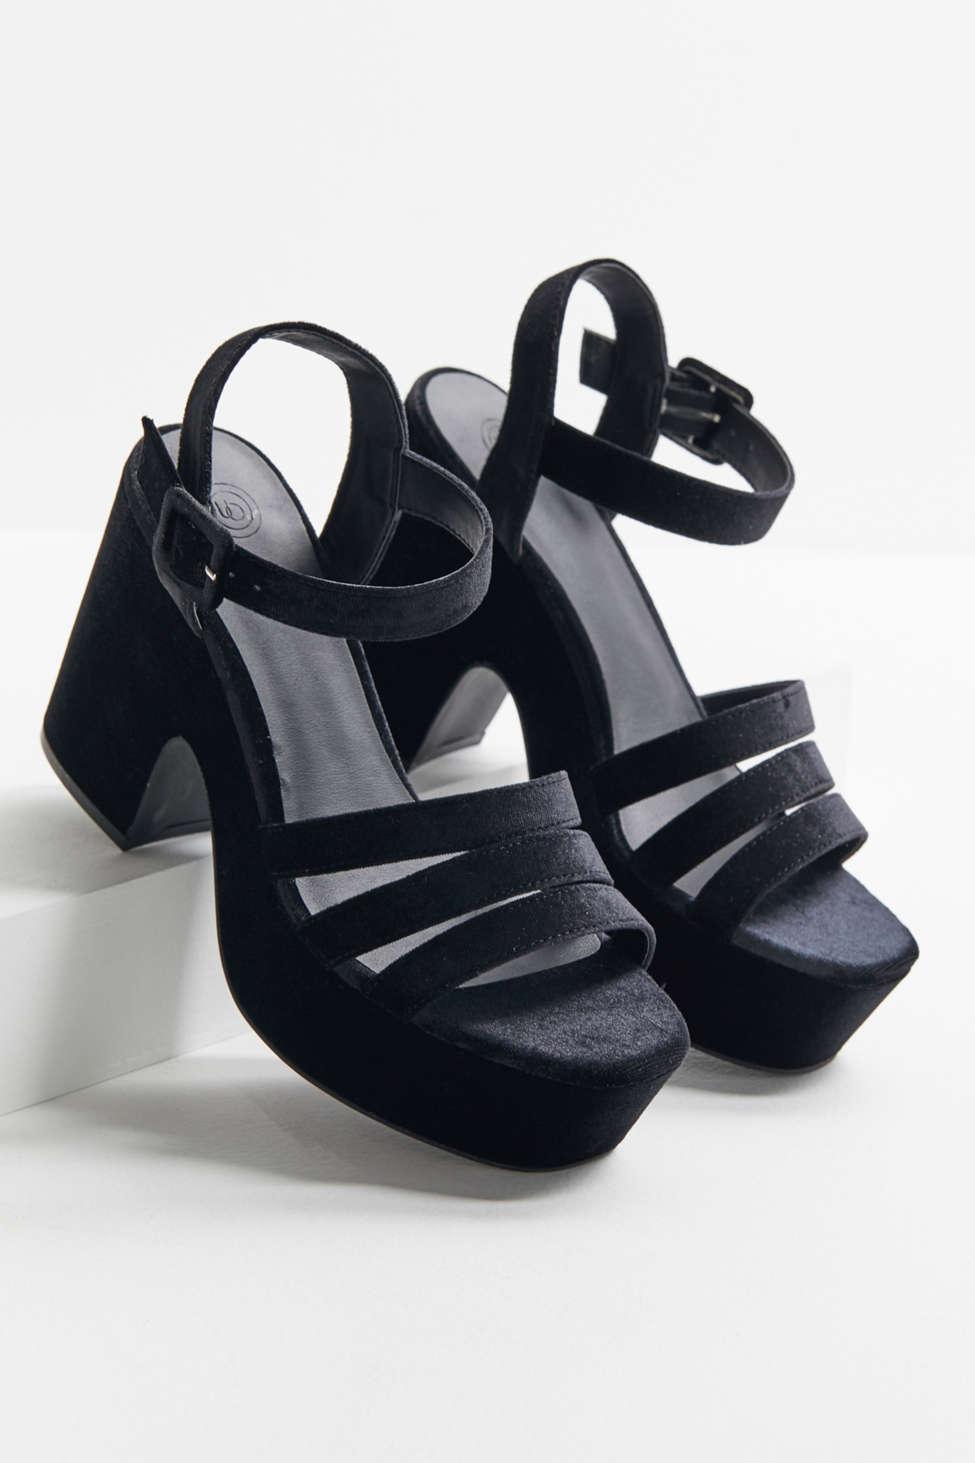 Urban Outfitters Uo Avery Platform Heel in Black | Lyst